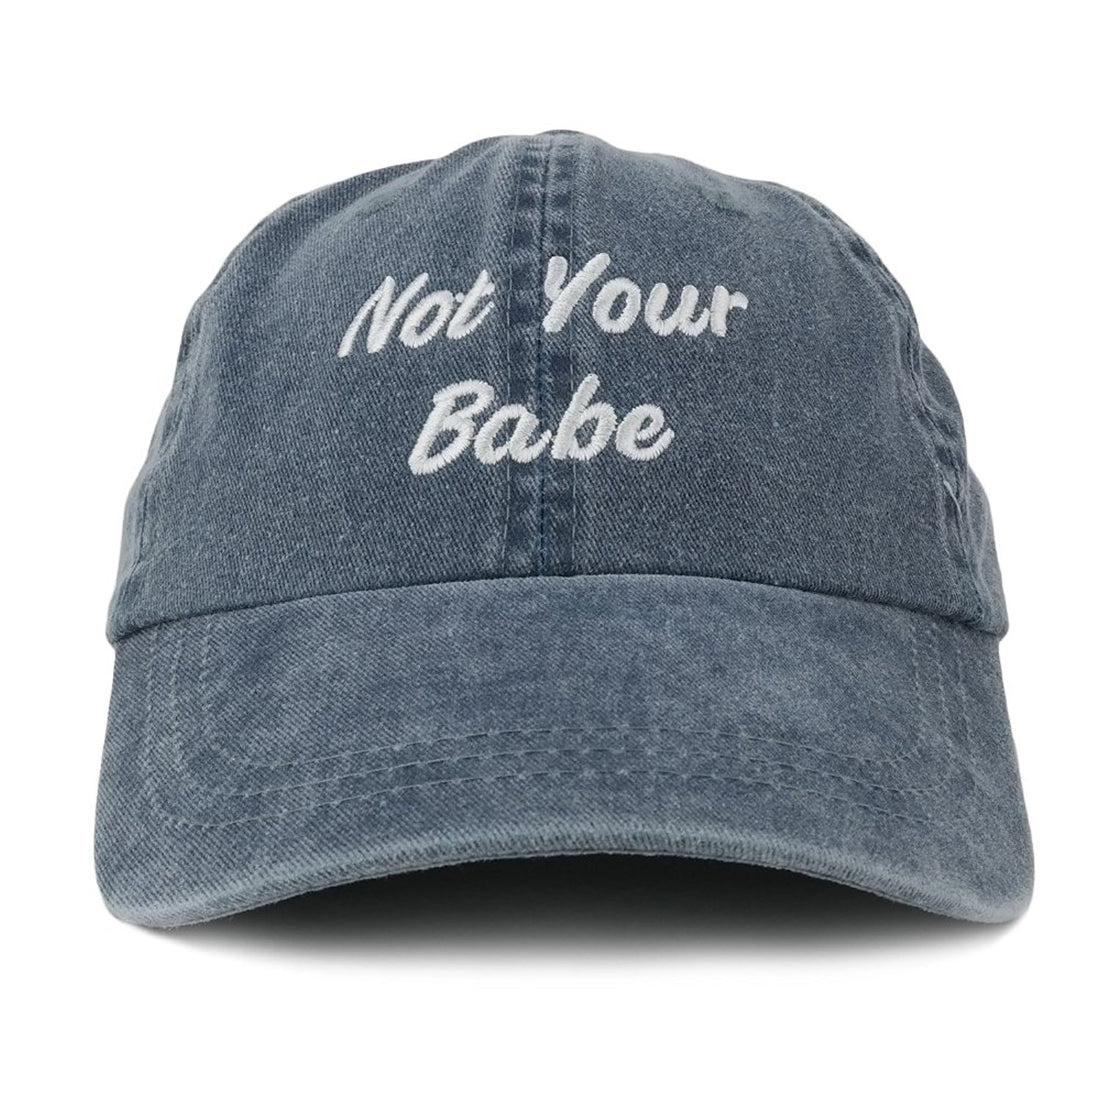 Trendy Apparel Shop Not Your Babe Embroidered Soft Crown Cotton Adjustable Cap